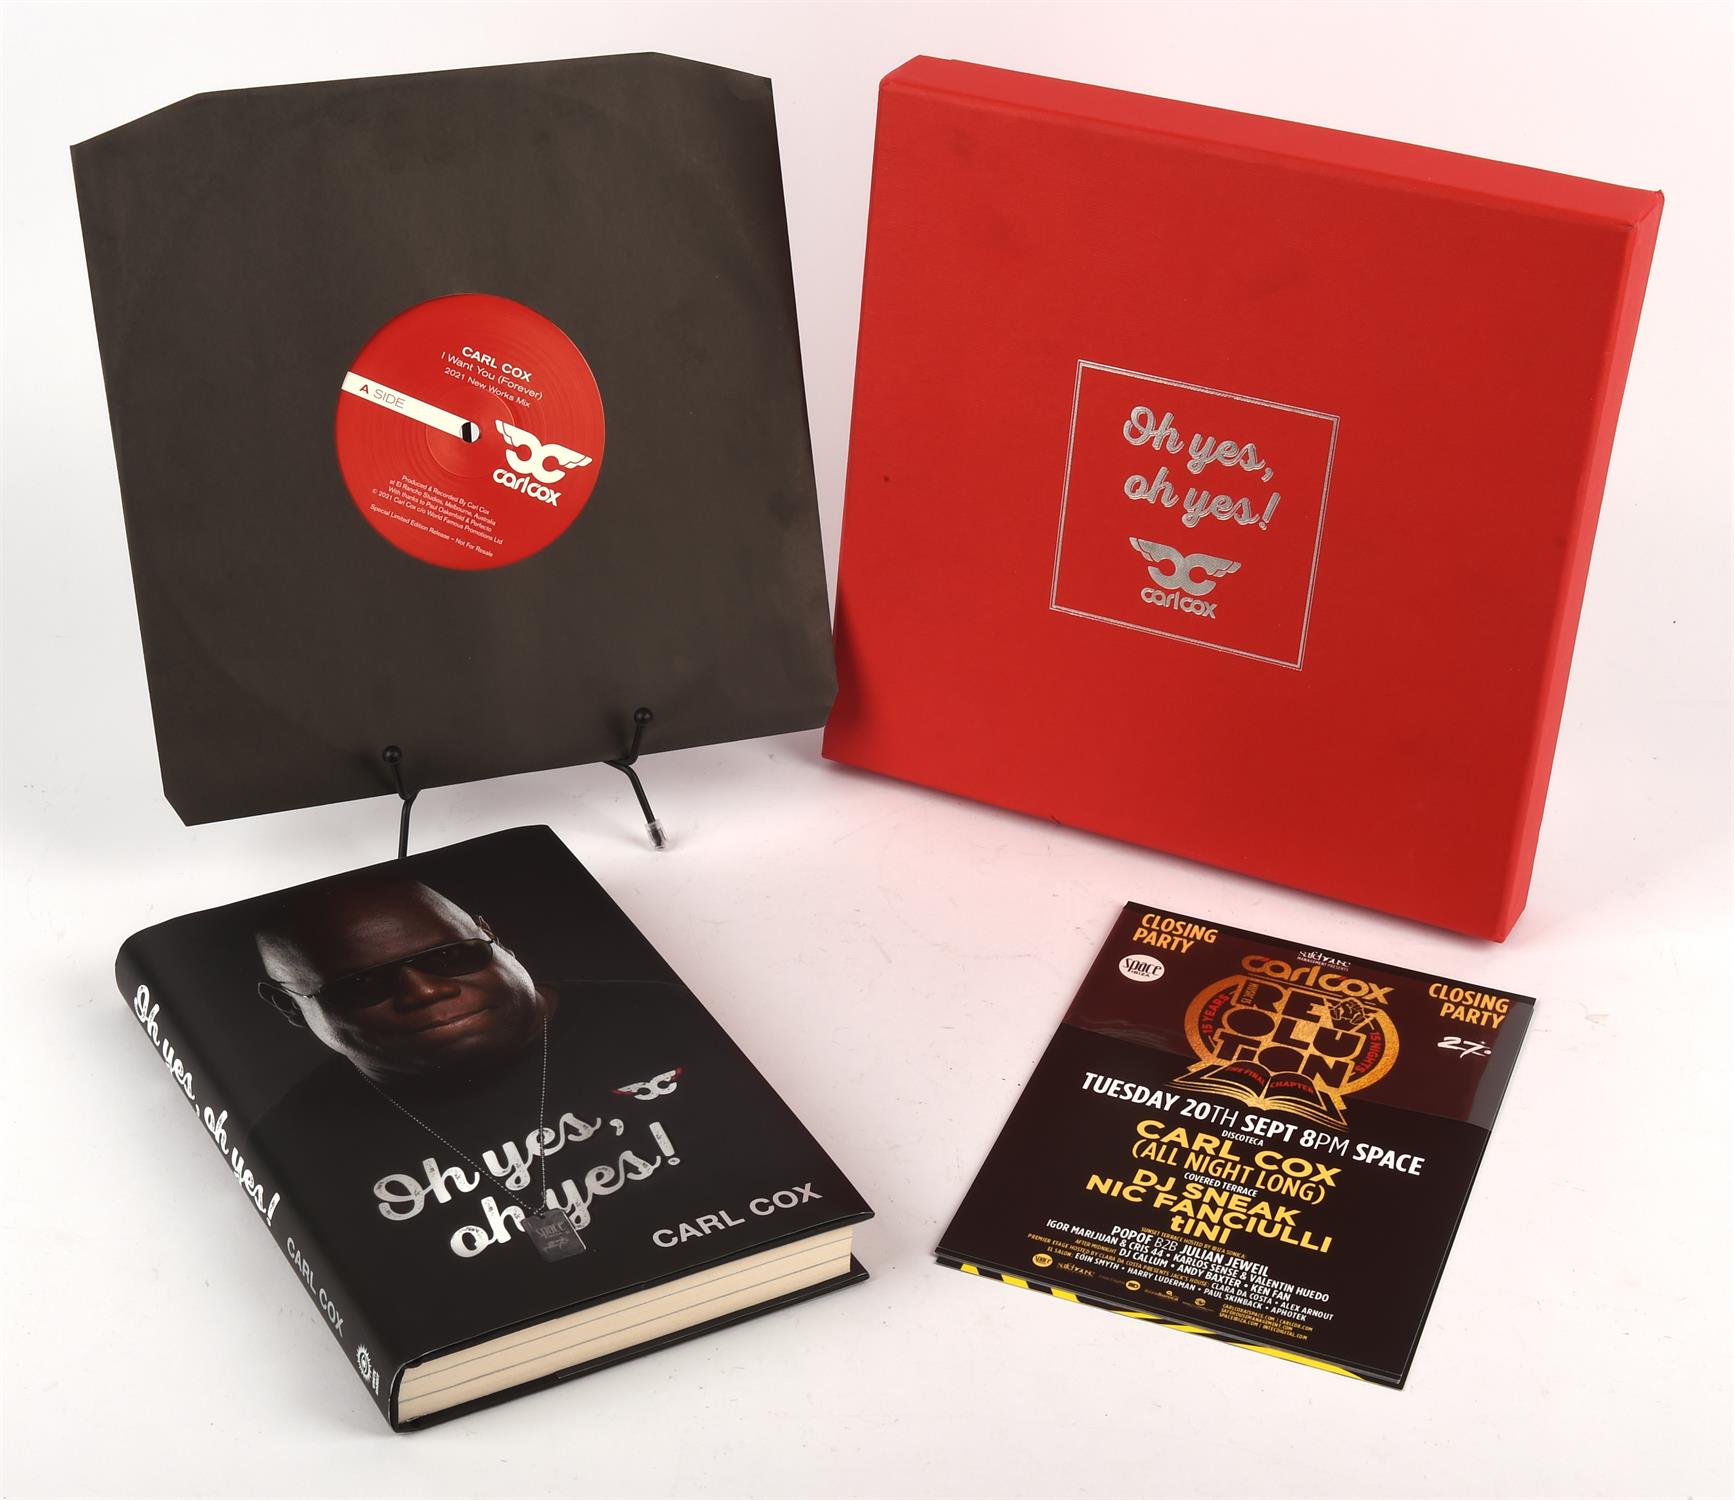 Carl Cox 'Oh Yes, Oh Yes !' Signed autobiography and special limited edition release record in a